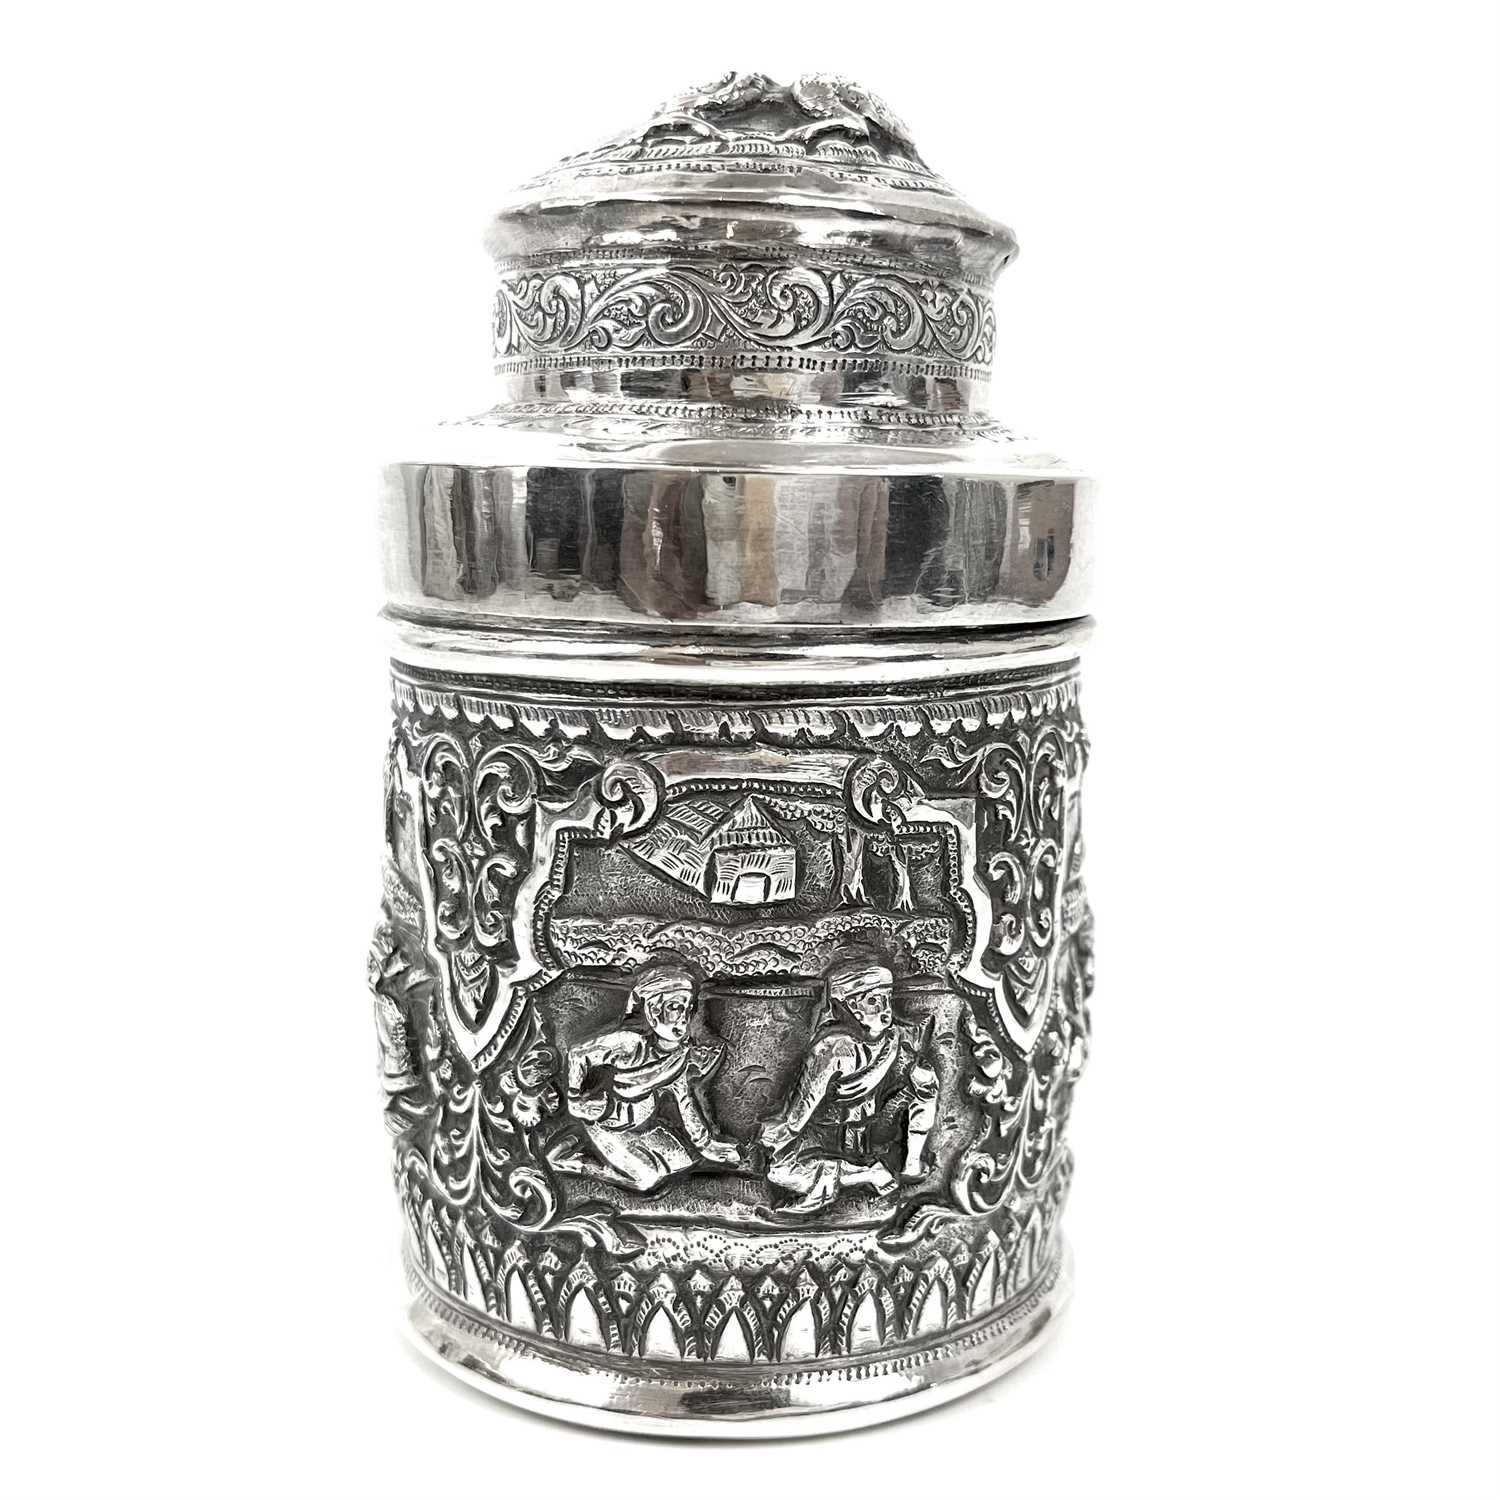 Two Burmese silver lidded cannisters, mid 20th century - Image 17 of 25